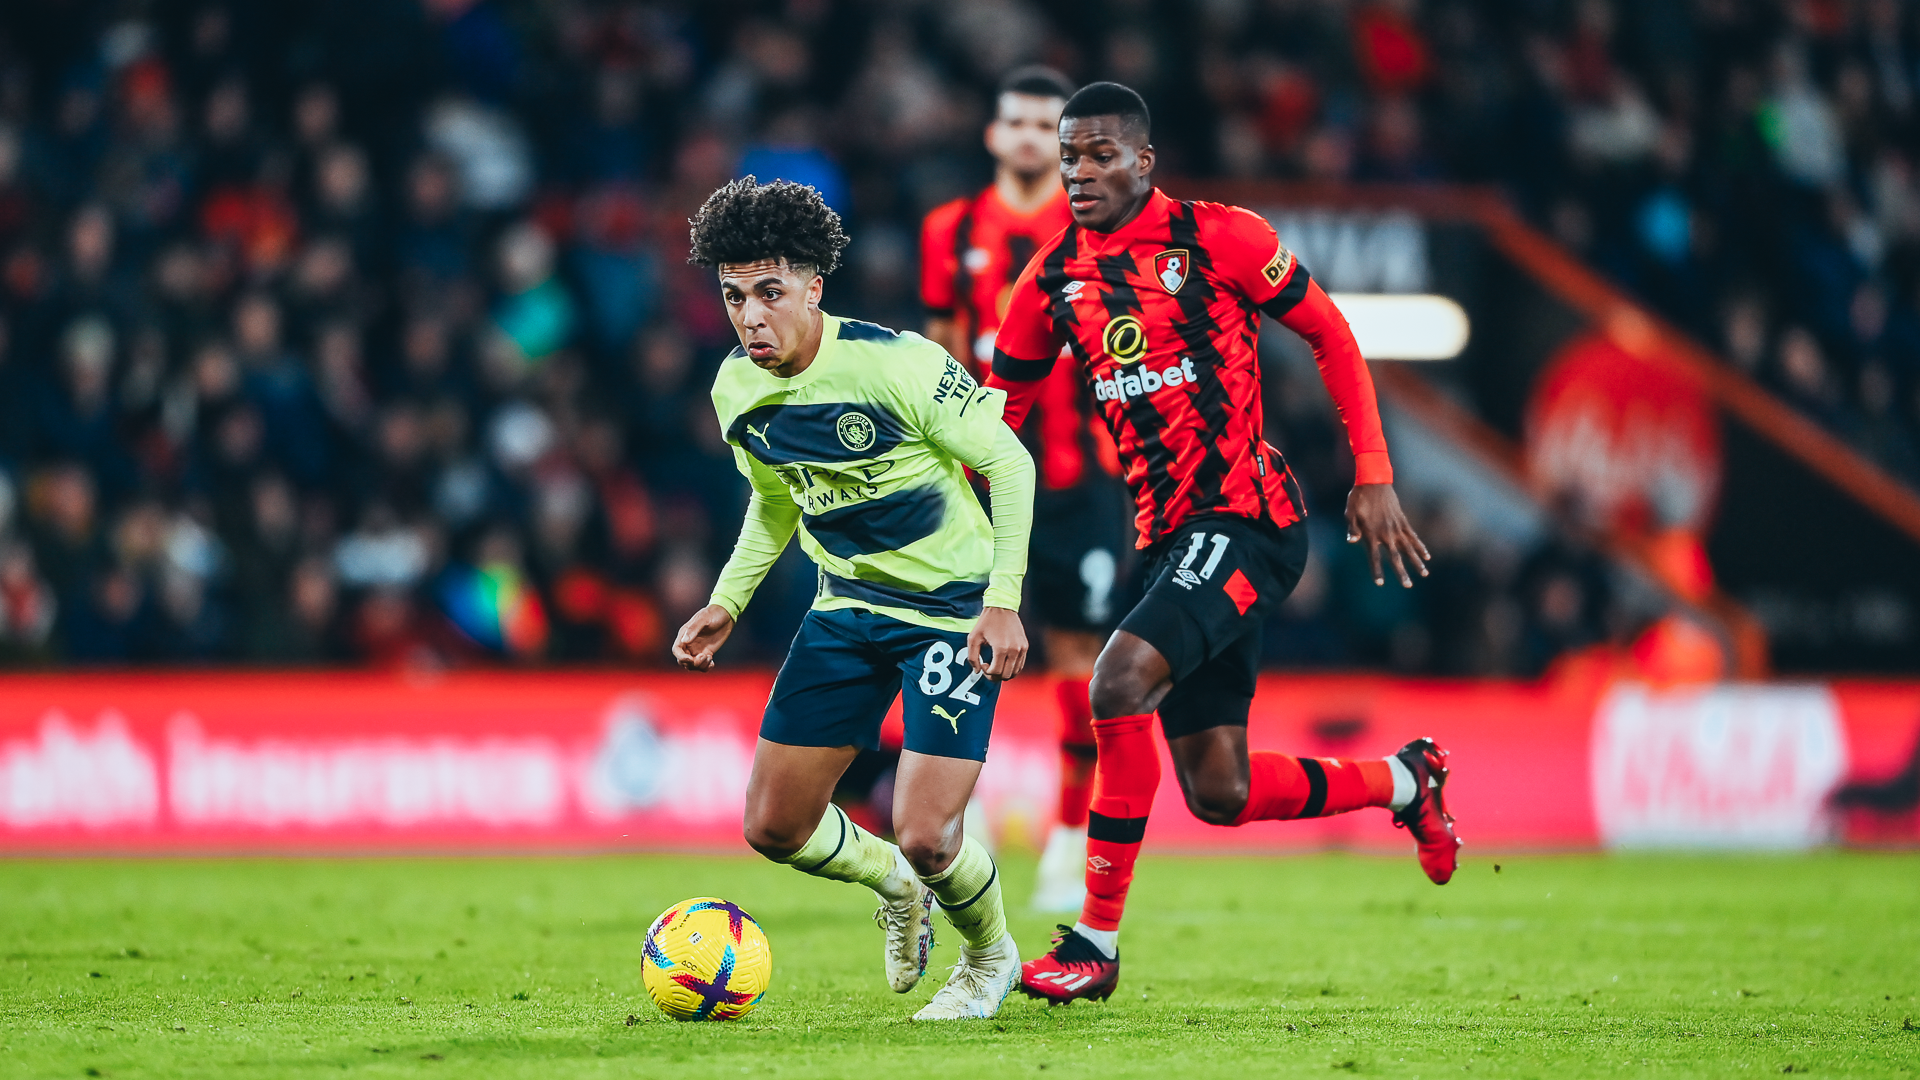 RELIABLE RICO : Rico Lewis excelling in defence and midfield, once again, for City.